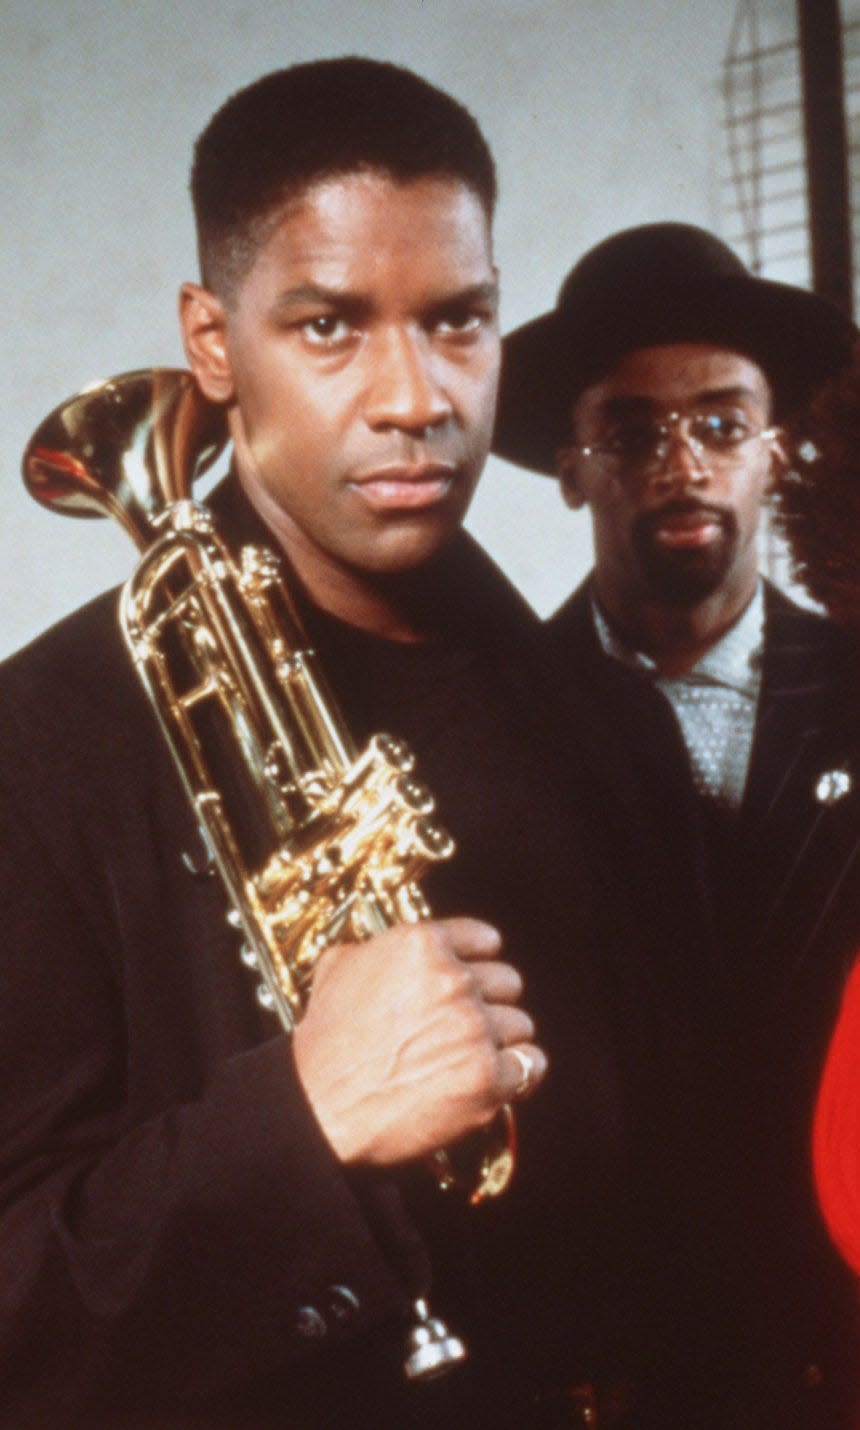 Denzel Washington (left) and Spike Lee star in Lee's 1990 movie "Mo' Better Blues."